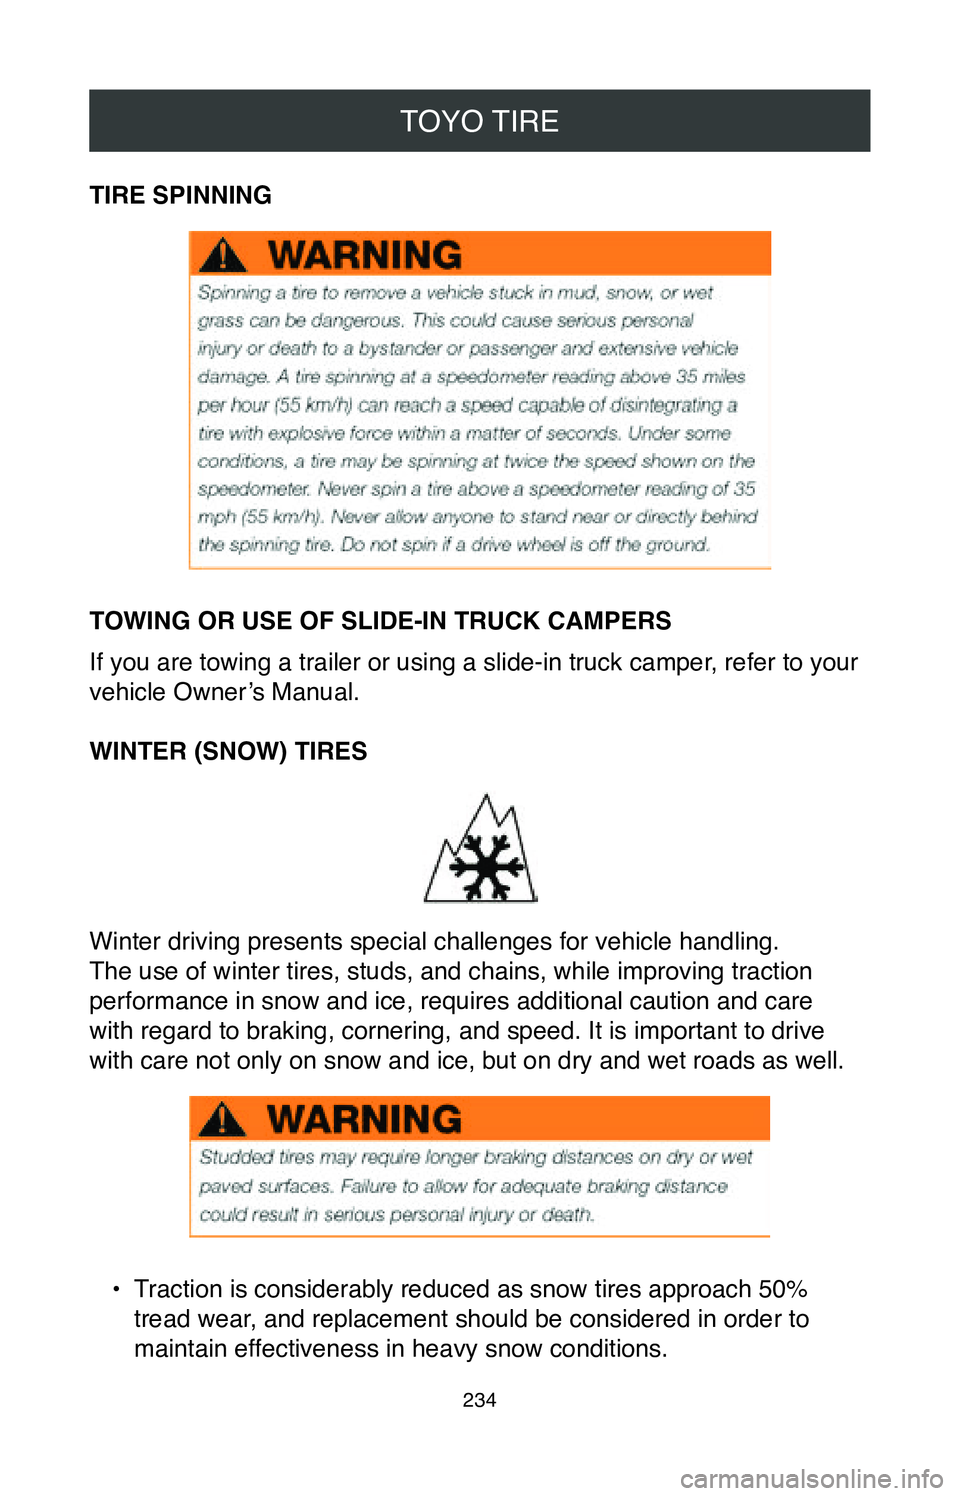 TOYOTA COROLLA HYBRID 2020  Warranties & Maintenance Guides (in English) TOYO TIRE
234
TIRE SPINNING
TOWING OR USE OF SLIDE-IN TRUCK CAMPERS
If you are towing a trailer or using a slide-in truck camper, refer to your 
vehicle Owner’s Manual.
WINTER (SNOW) TIRES
Winter dr